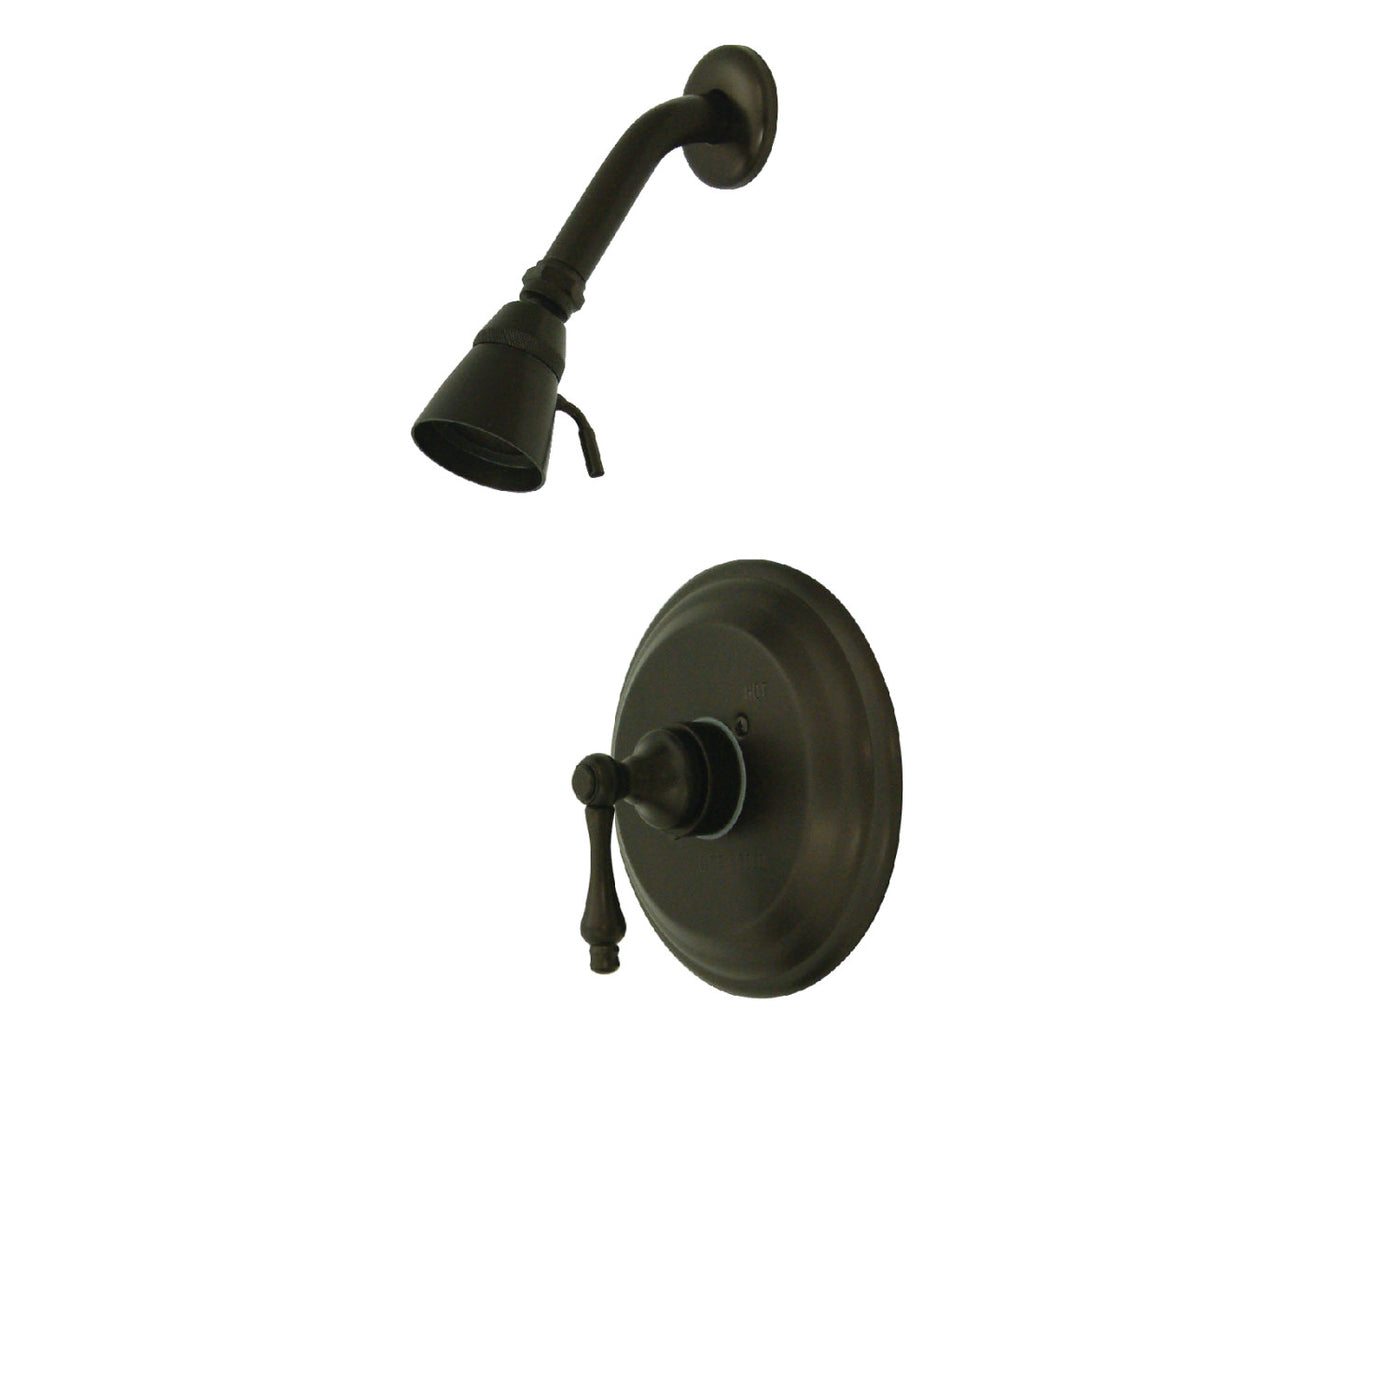 Elements of Design EB3635ALSO Pressure Balanced Shower Faucet, Oil Rubbed Bronze